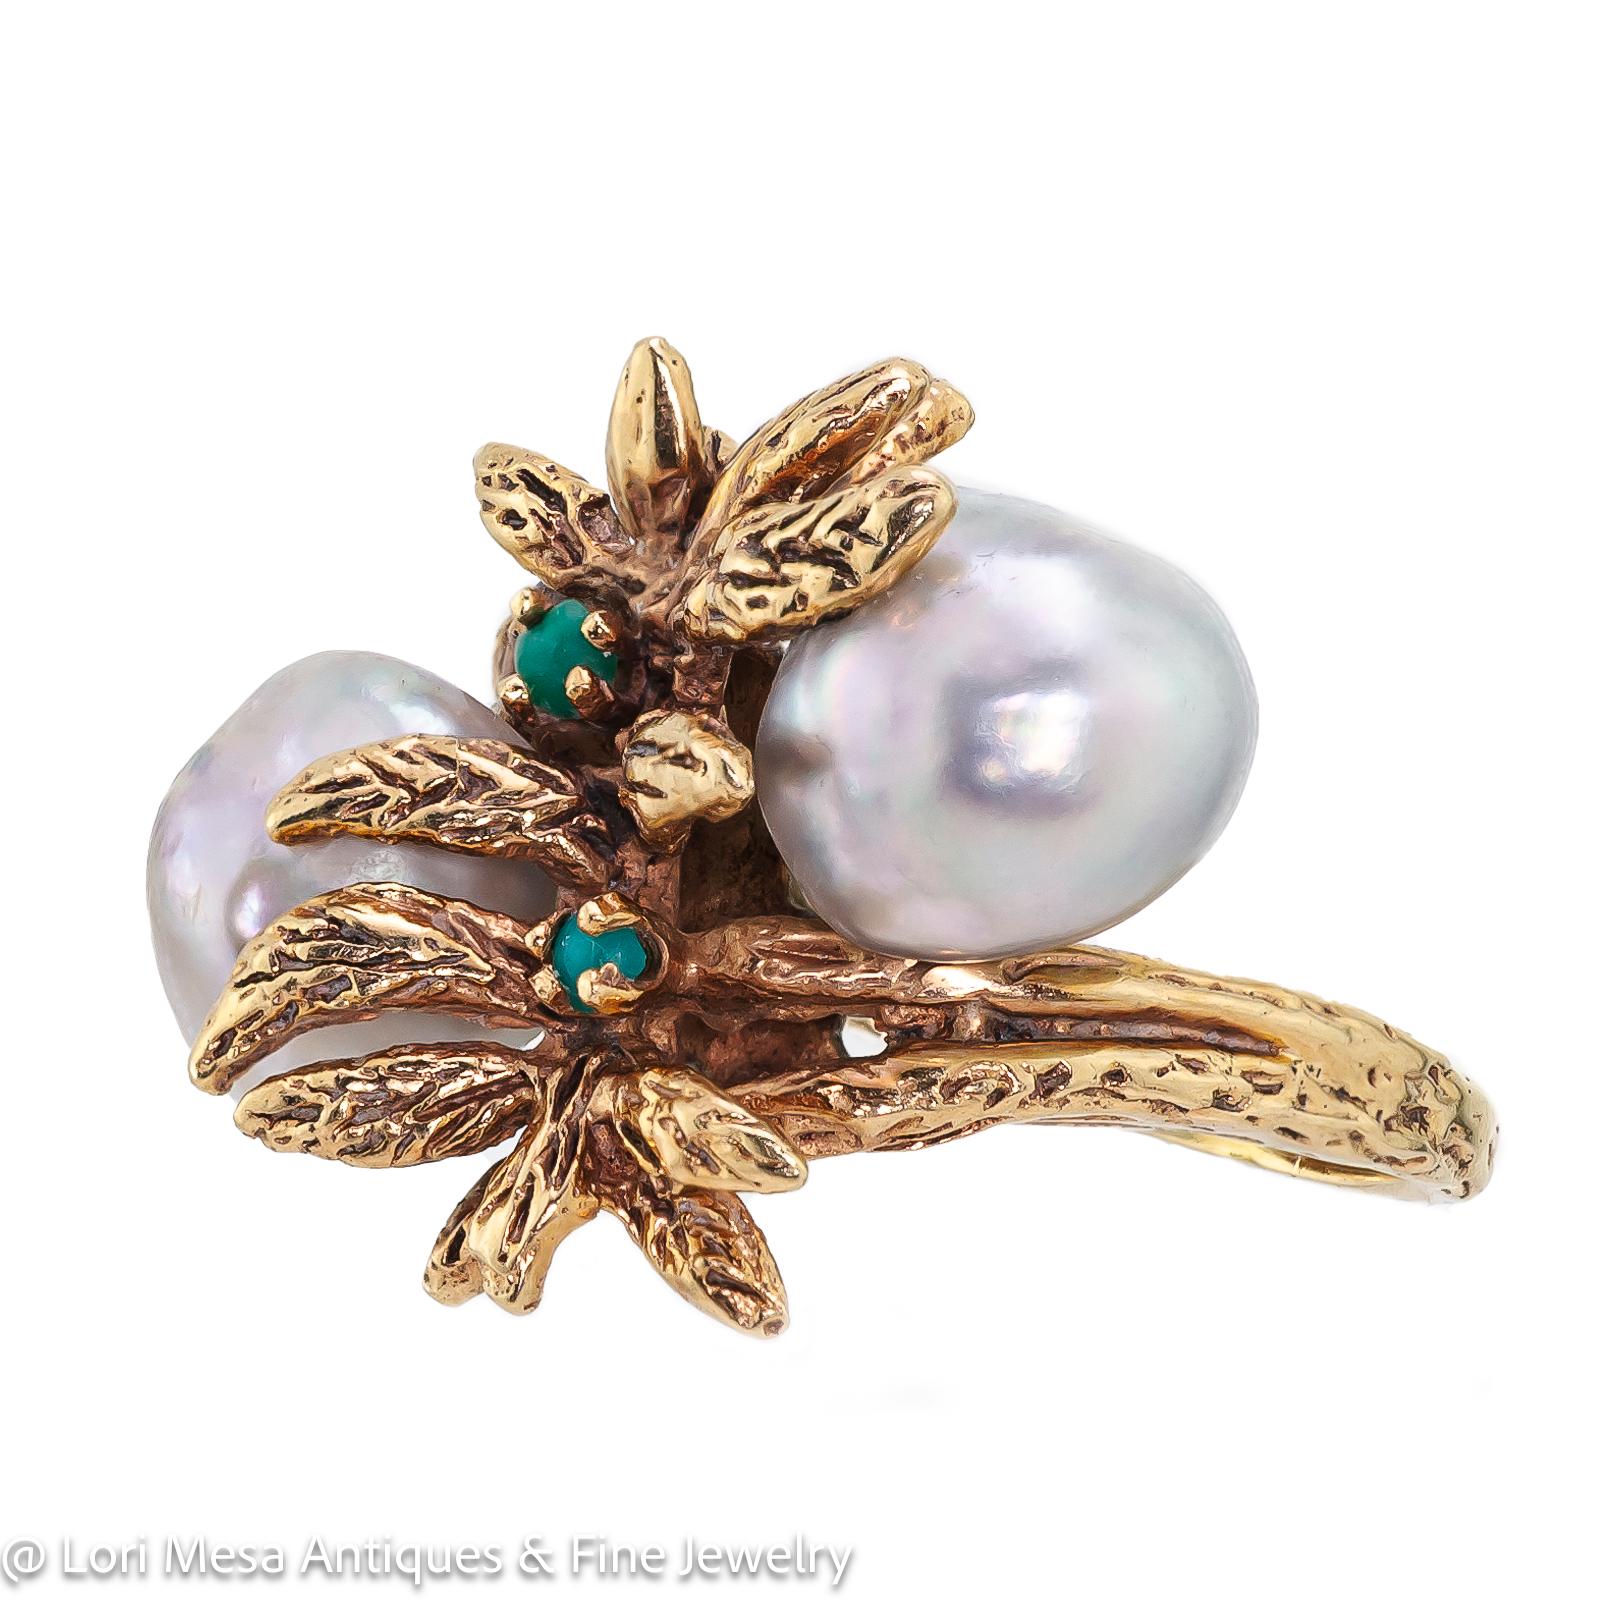 Vintage 1960s cultured pearl emerald and 14kt yellow gold ring - two grey baroque pearls, two small round emeralds, textured finish foliate design crossover mount.